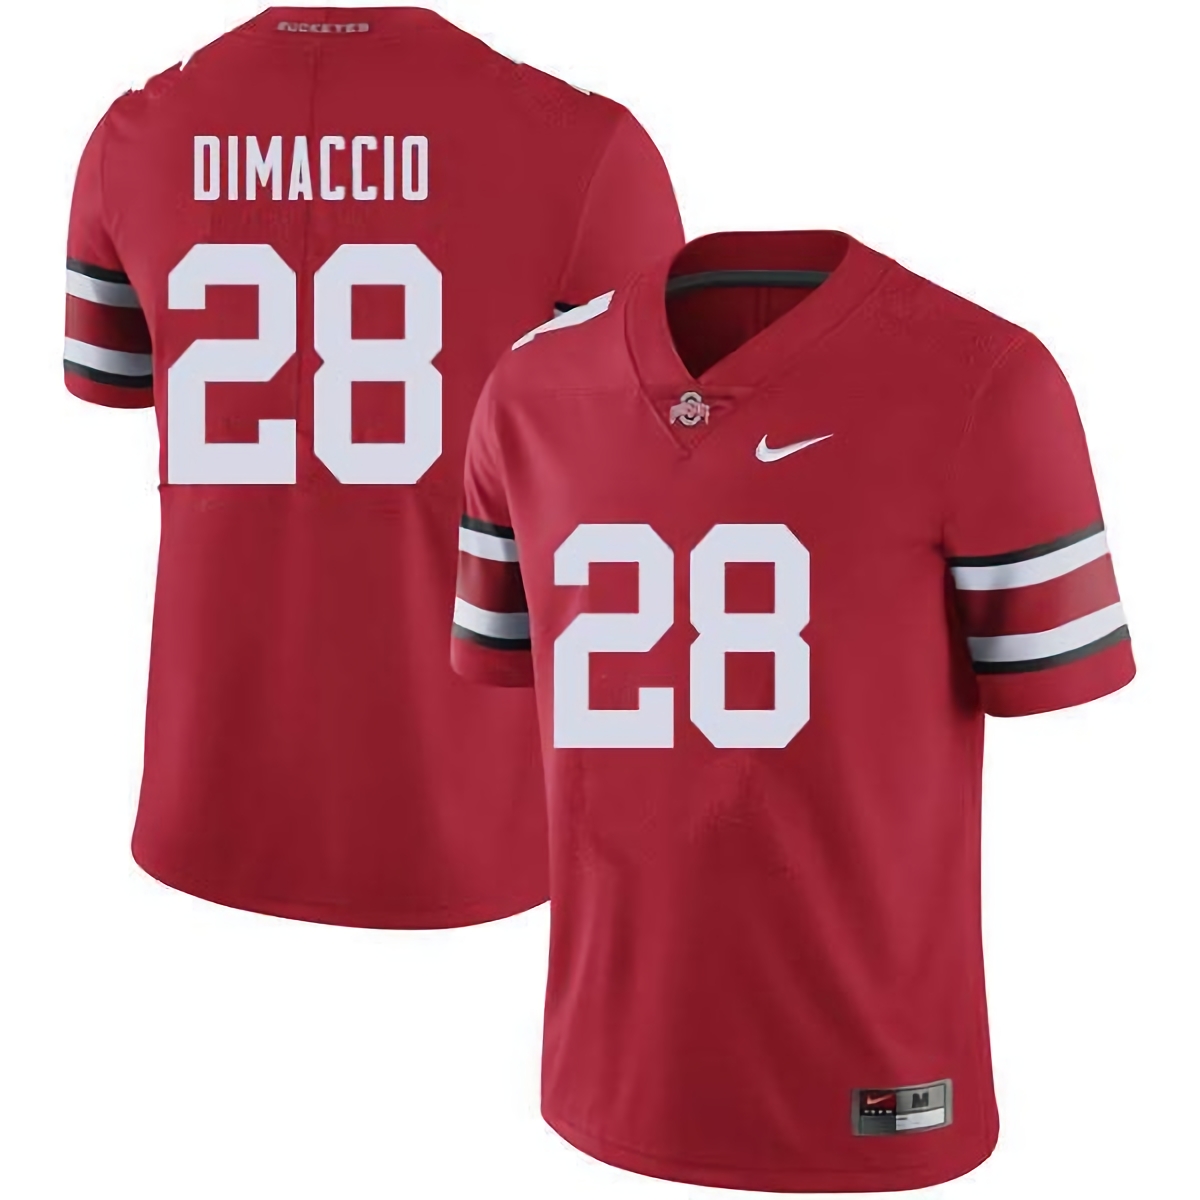 Dominic DiMaccio Ohio State Buckeyes Men's NCAA #28 Nike Red College Stitched Football Jersey UVT0556VY